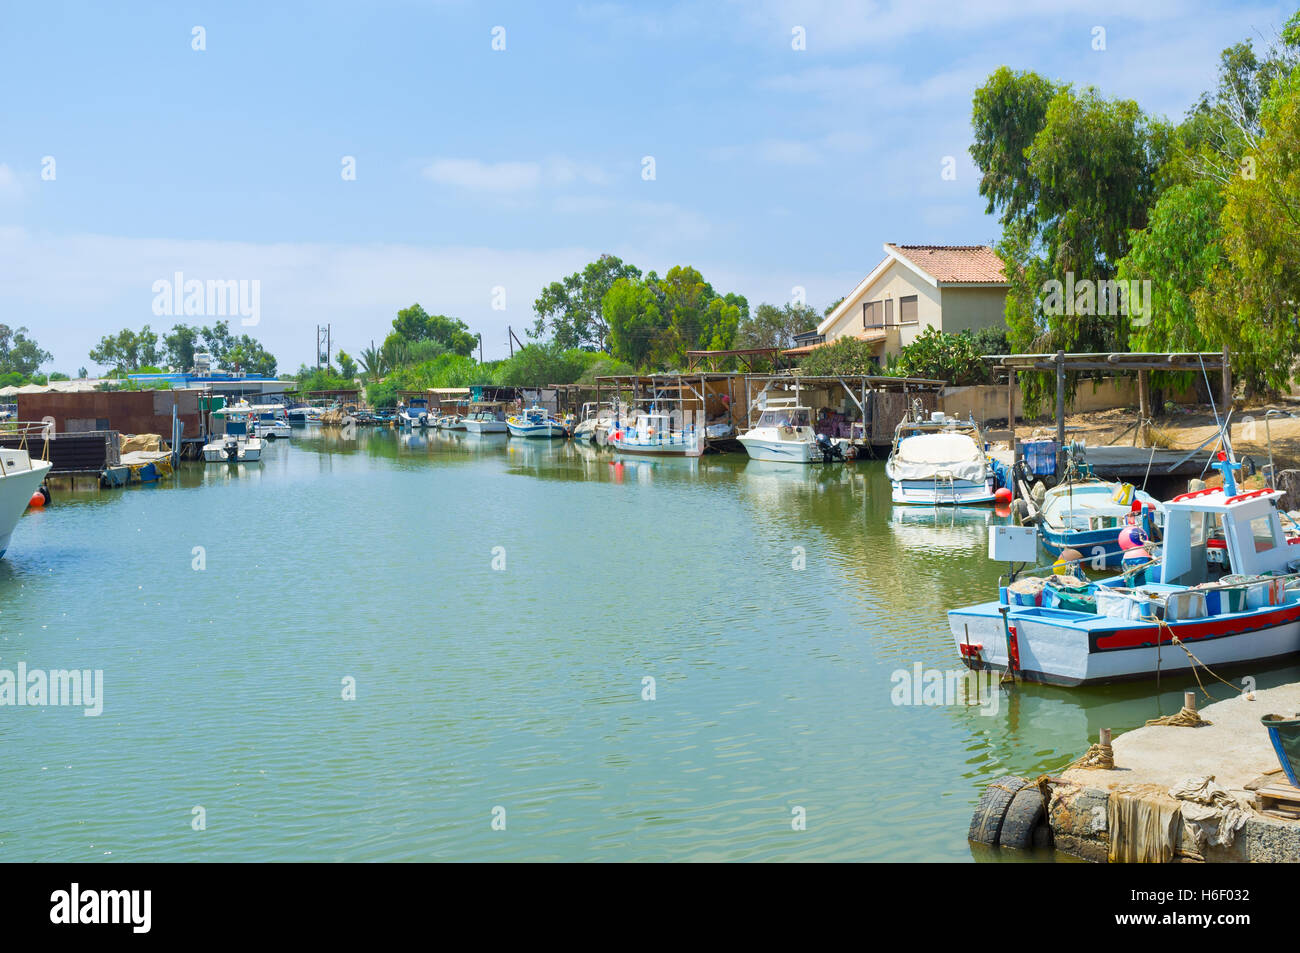 The fishing village with many moored boats, always ready for trips, Liopetri, Cyprus. Stock Photo